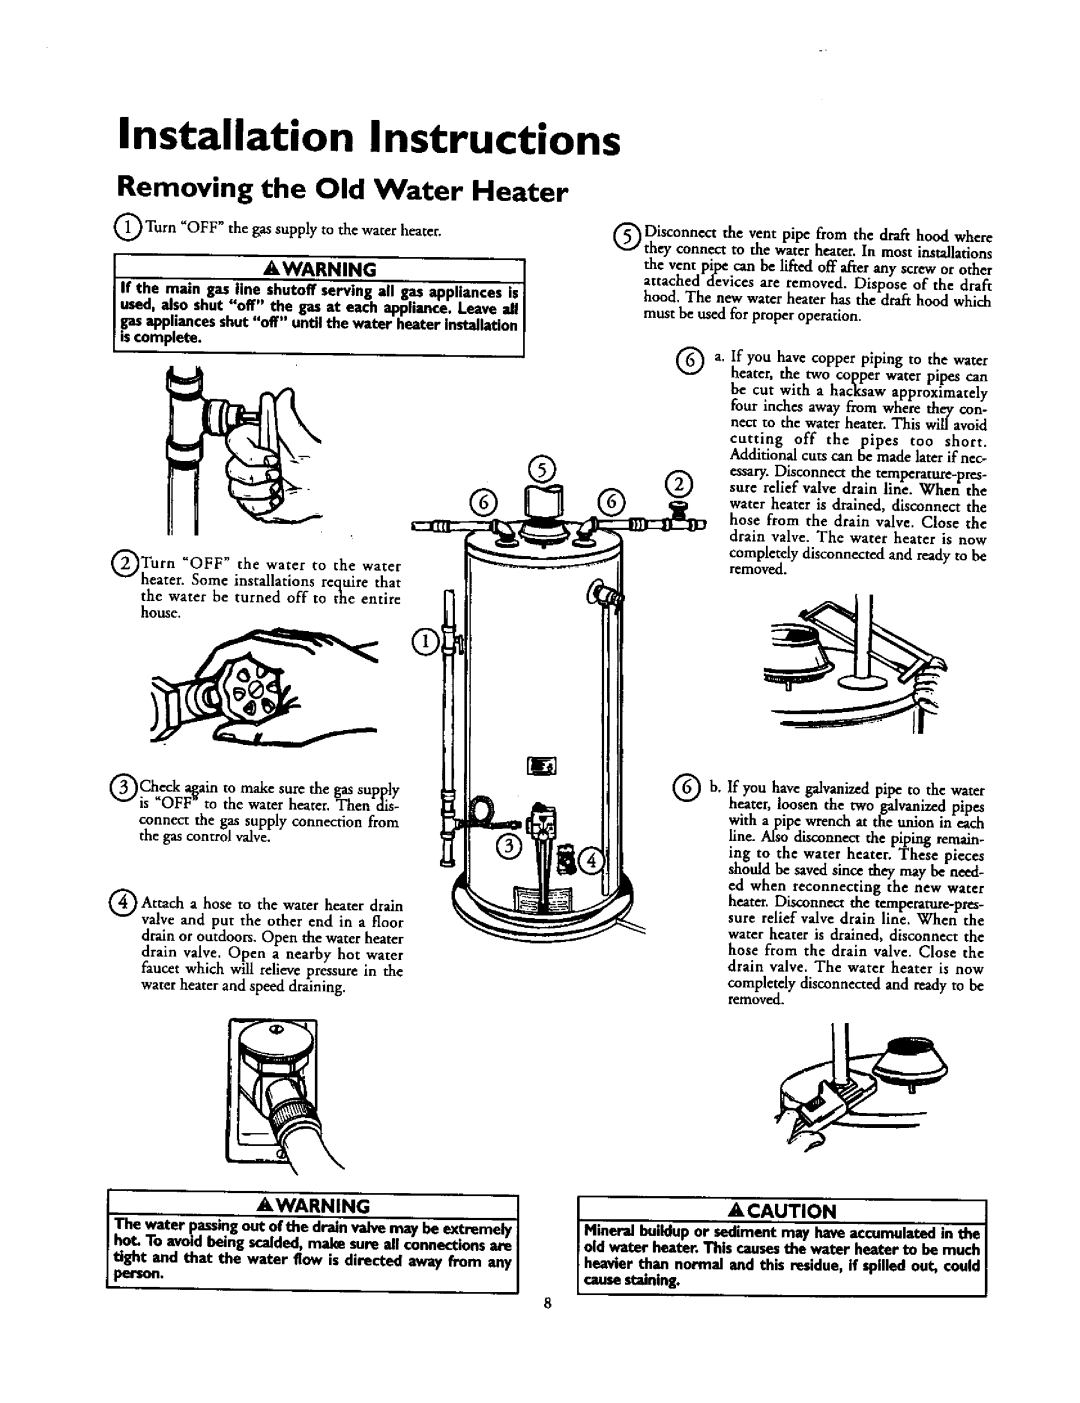 Kenmore 153.337462 Installation, Instructions, Removing the Old Water Heater, If the main gasline--all, gasappliancesis 